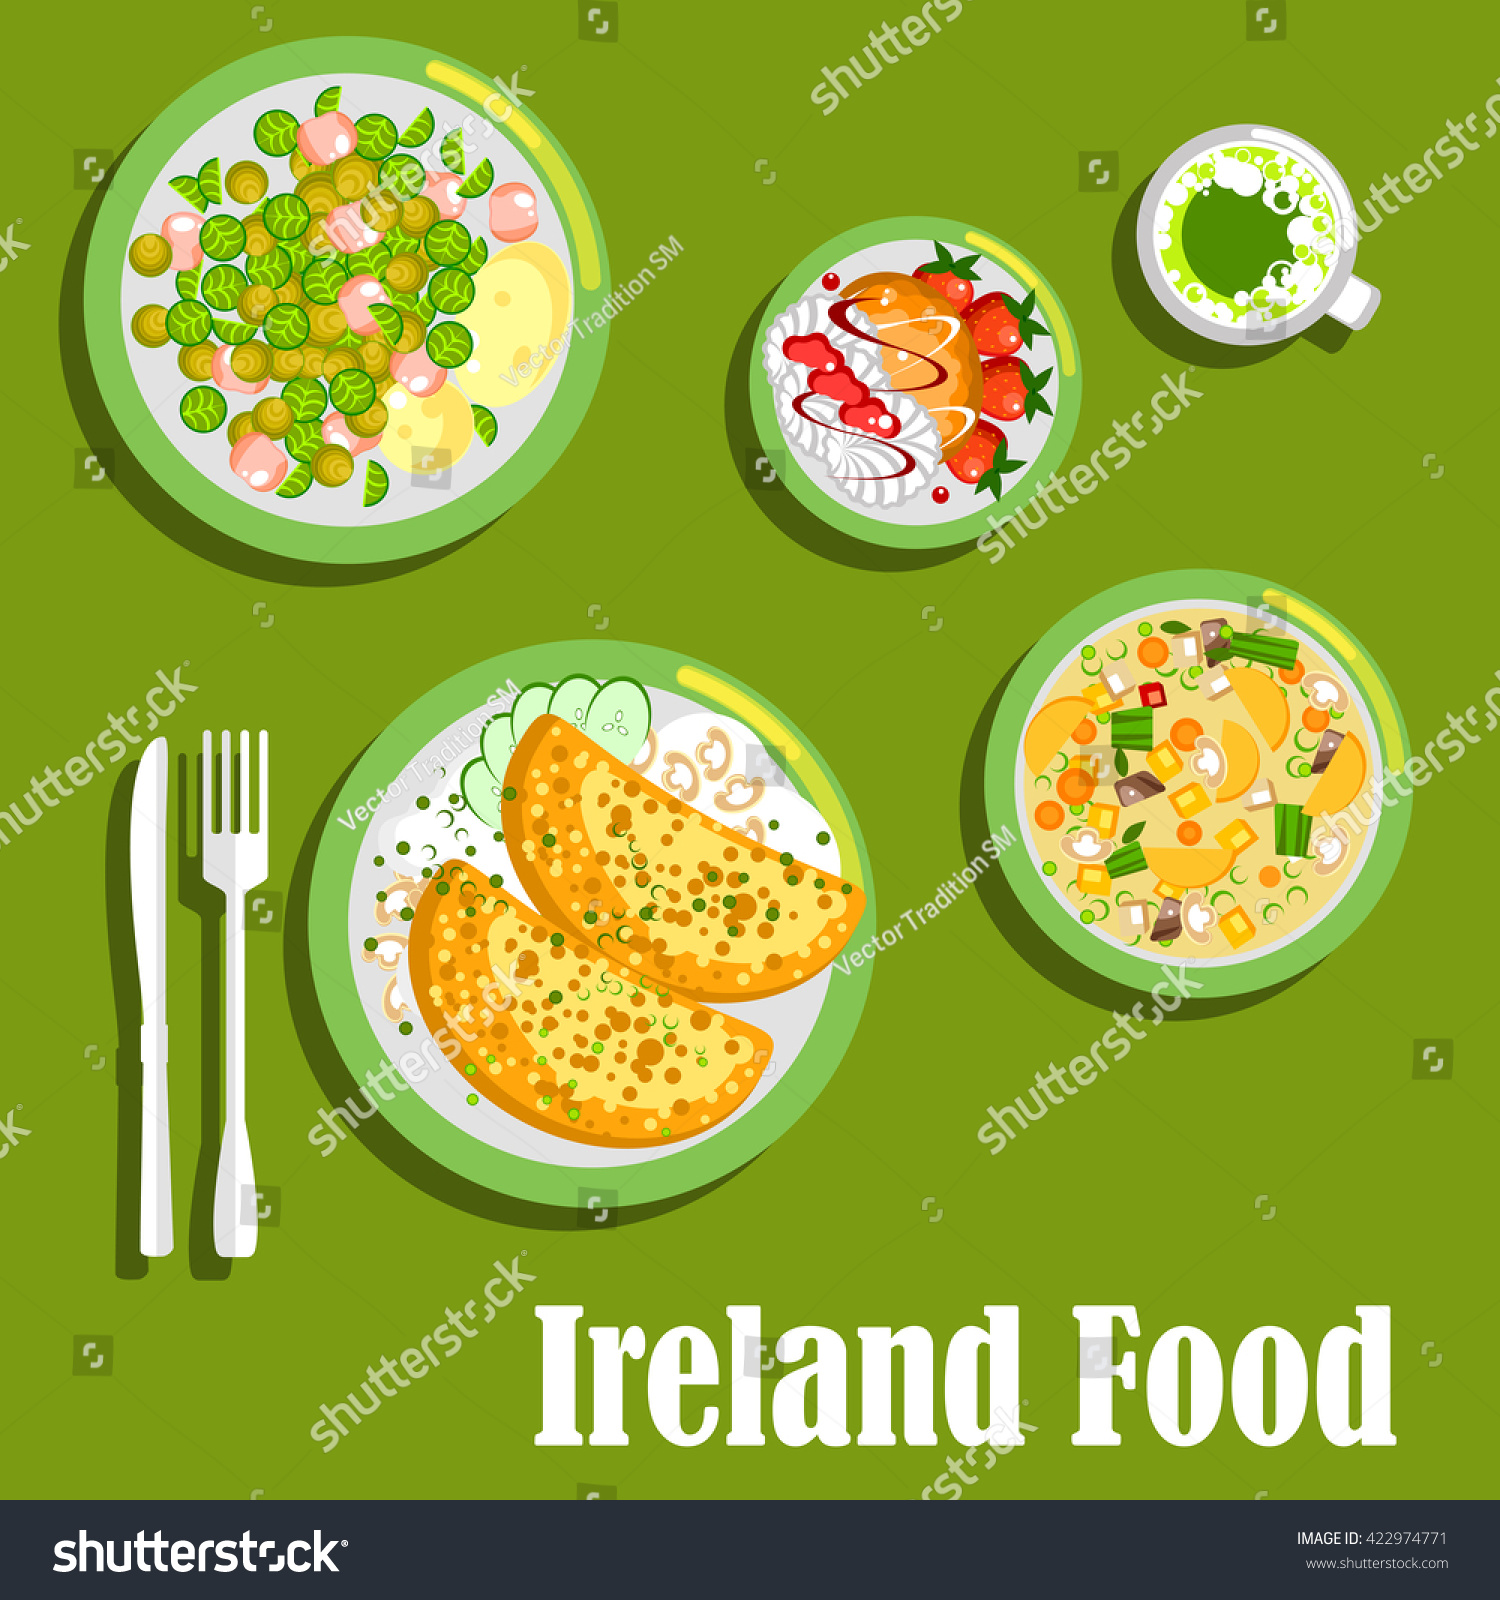 SVG of Irish cuisine with potato pancakes boxty with cheesy mushroom sauce and brussels sprouts warm salad with beef, dublin stew coddle, green beer and merengue with fresh strawberries and hazelnut biscuits svg